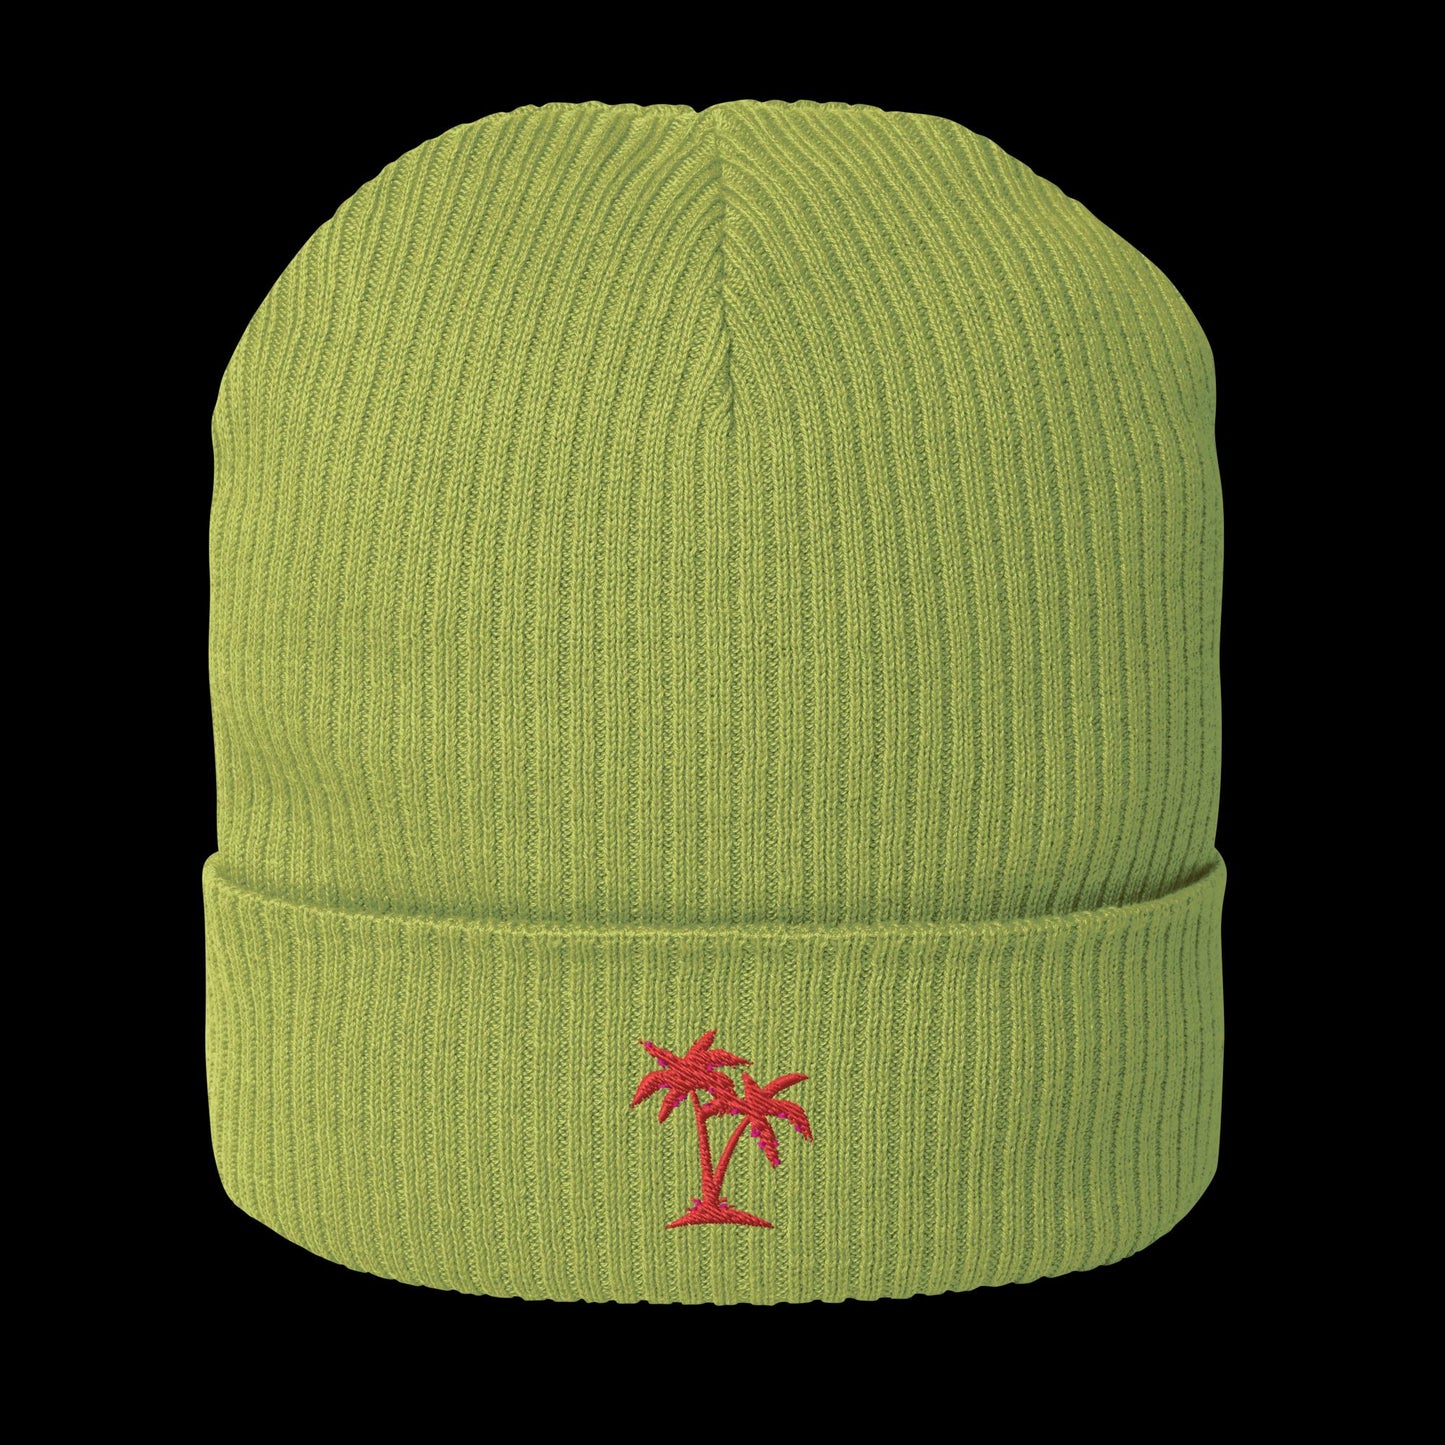 Olive green beanie with cuff and palm tree logo